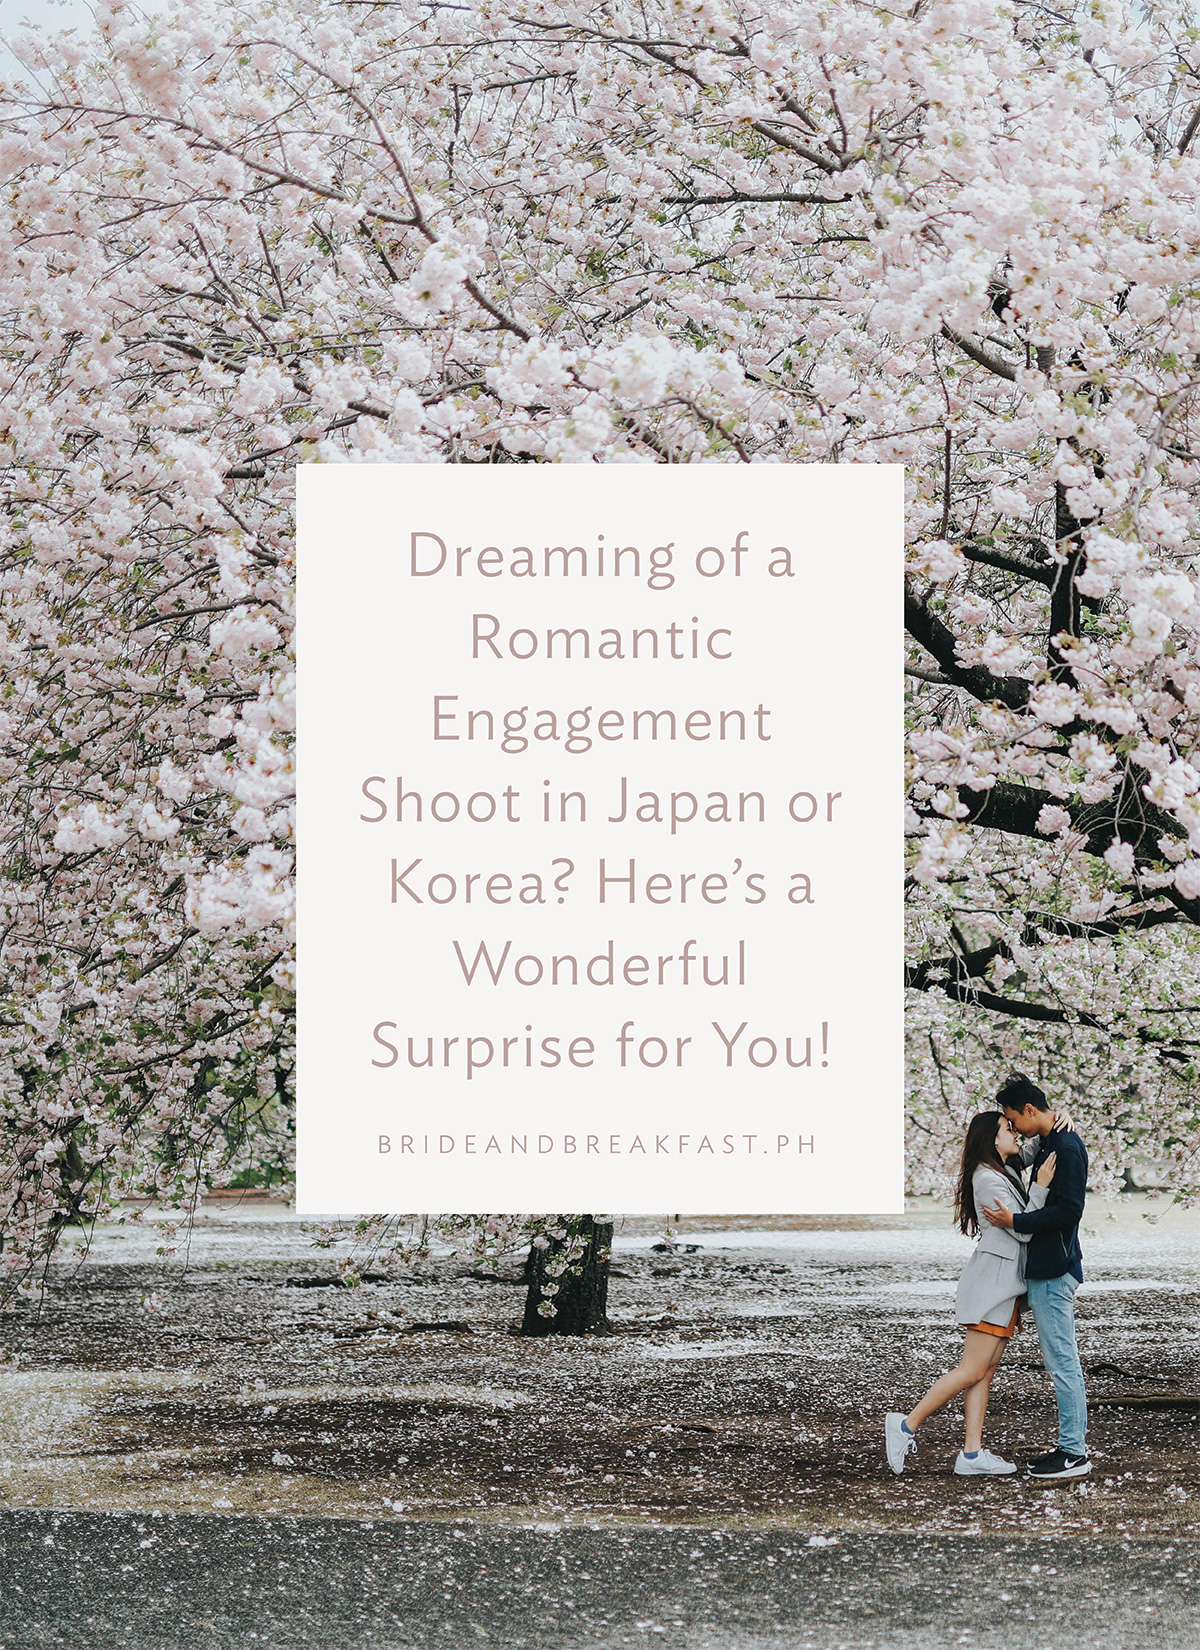 Dreaming of A Romantic Engagement Shoot in Japan or Korea? Here’s a Wonderful Surprise For You!